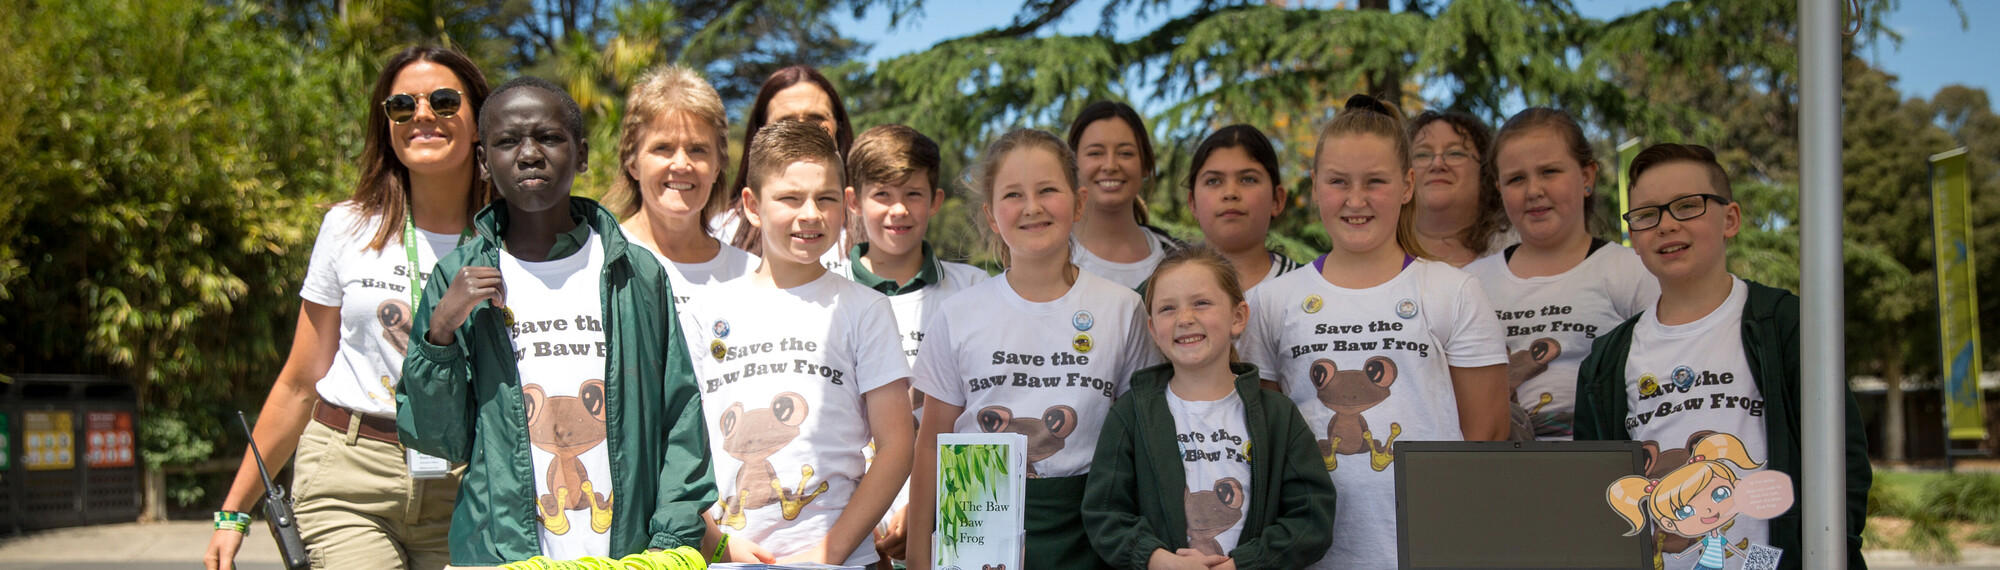 Group of students standing in a row smiling wearing shirts saying 'save the Baw Baw' frog